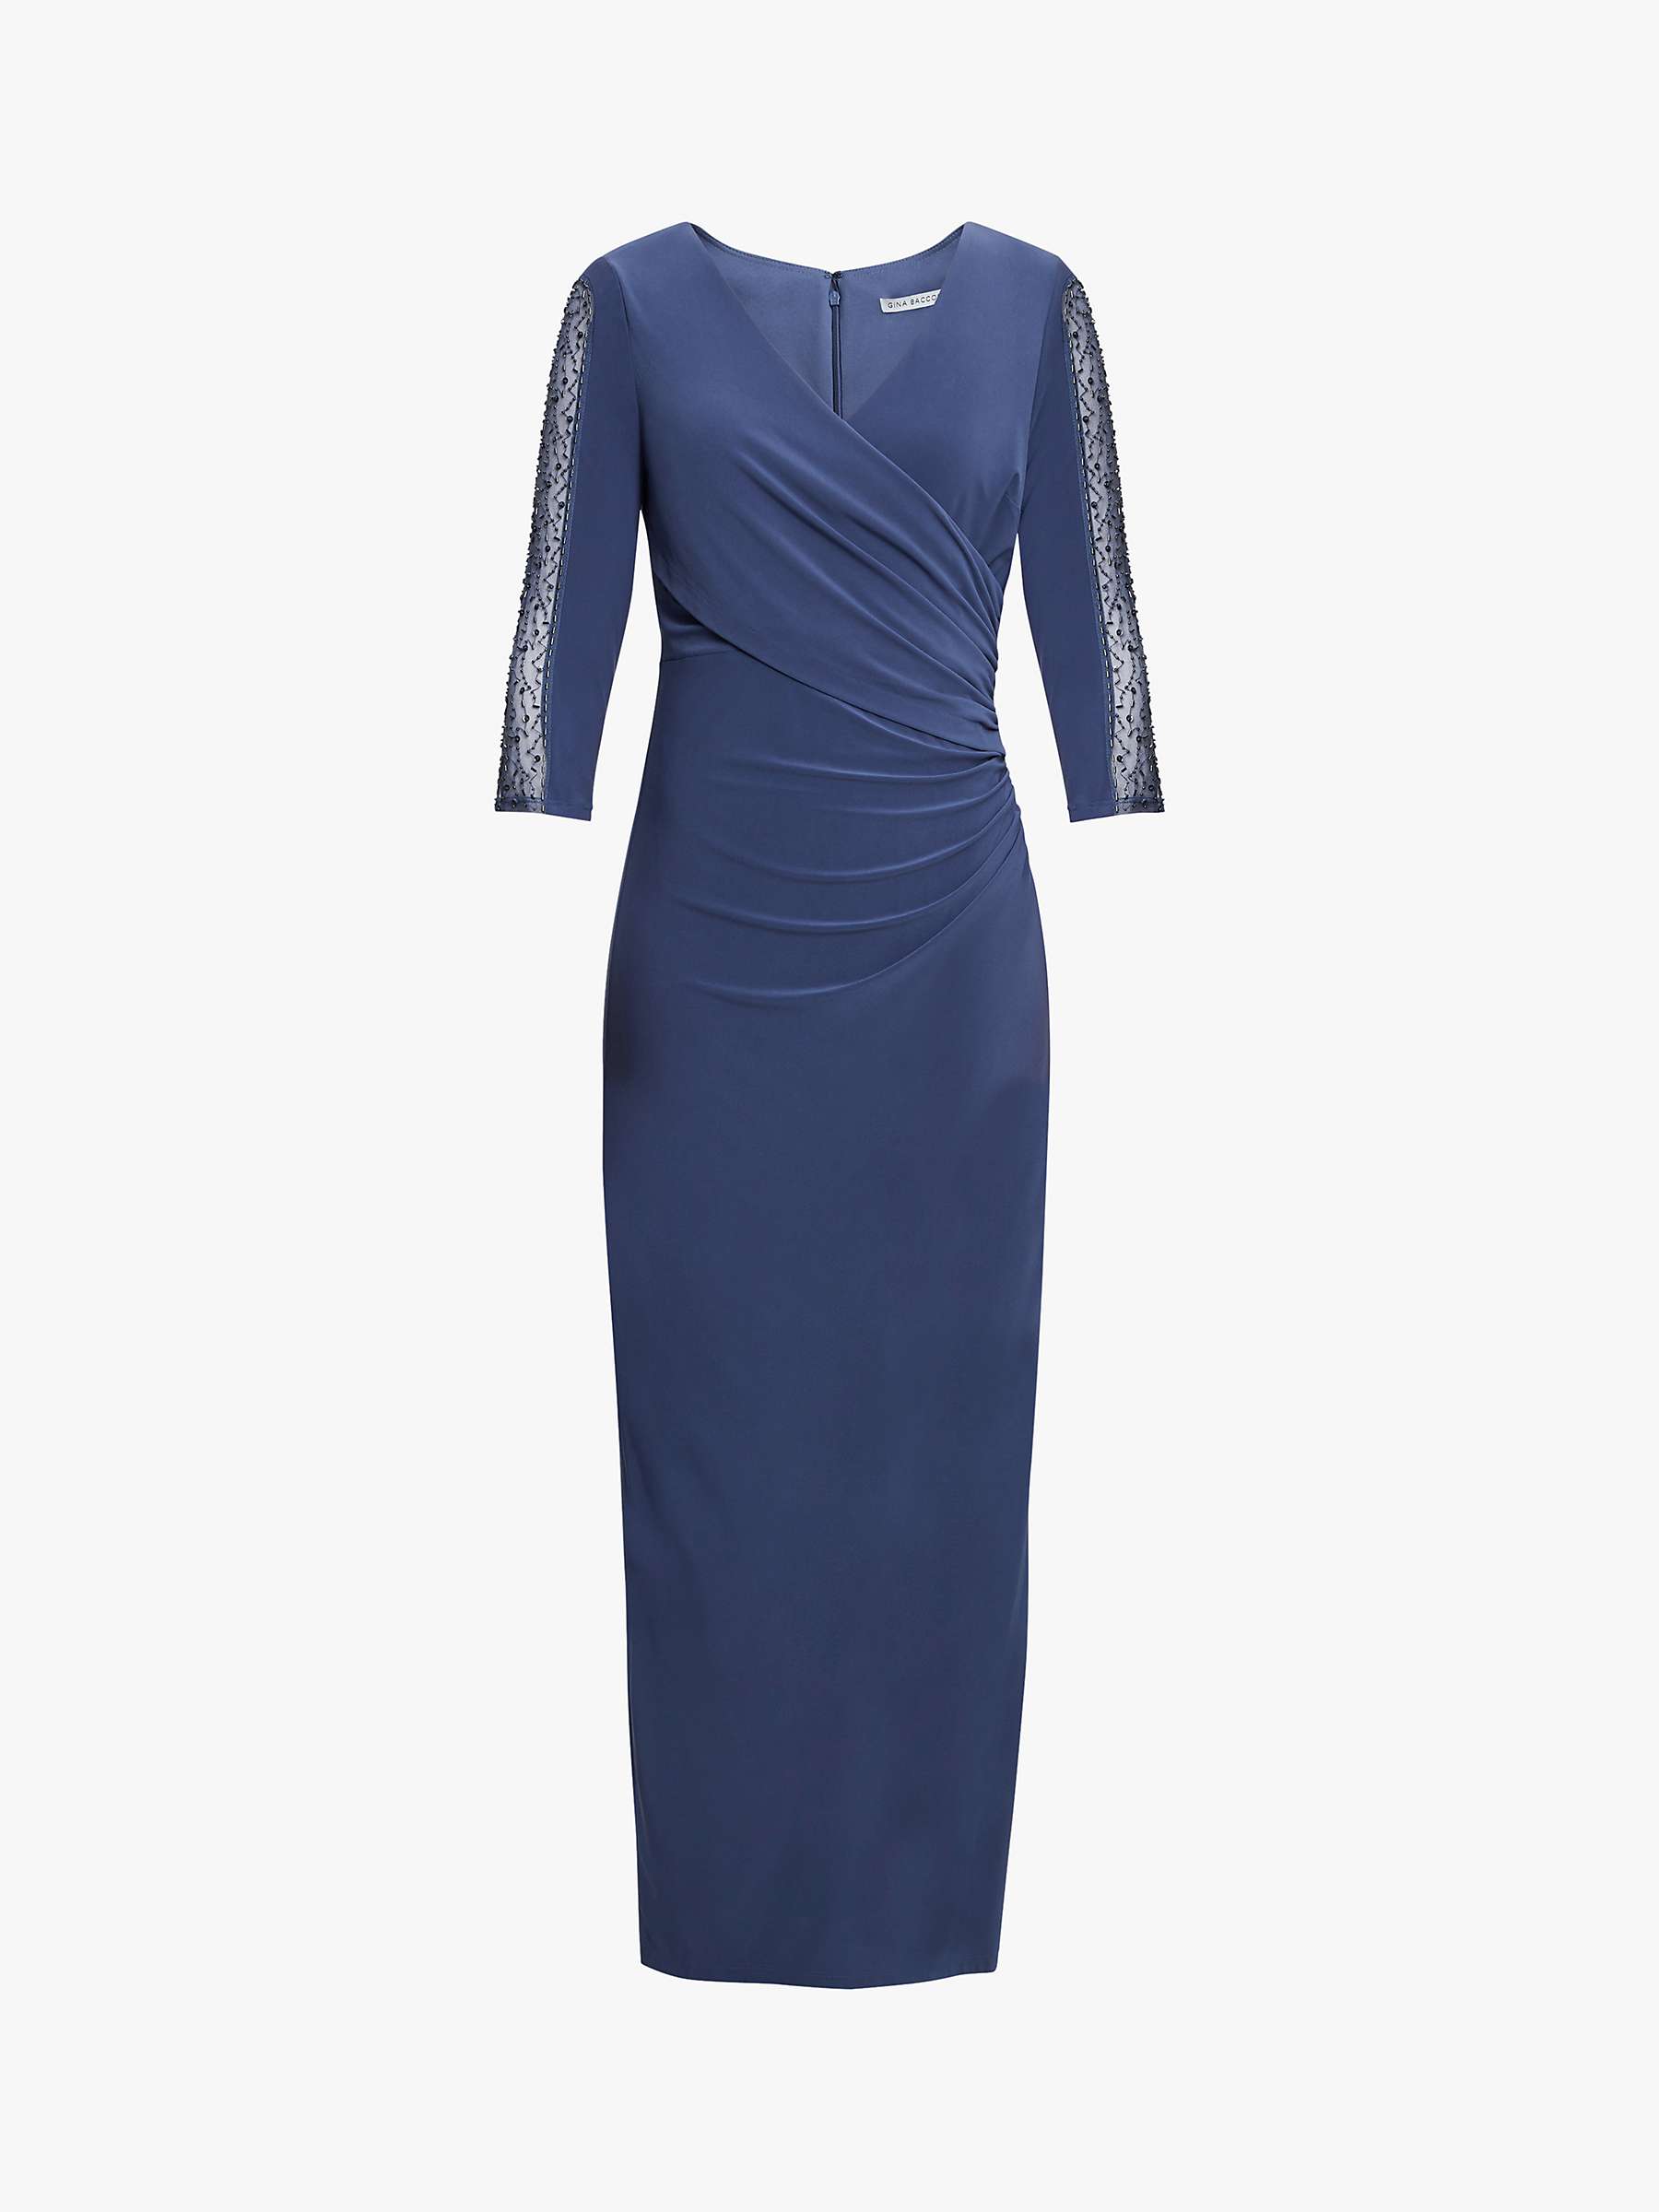 Buy Gina Bacconi Gretchen Ruched Maxi Dress, Wedgewood Online at johnlewis.com